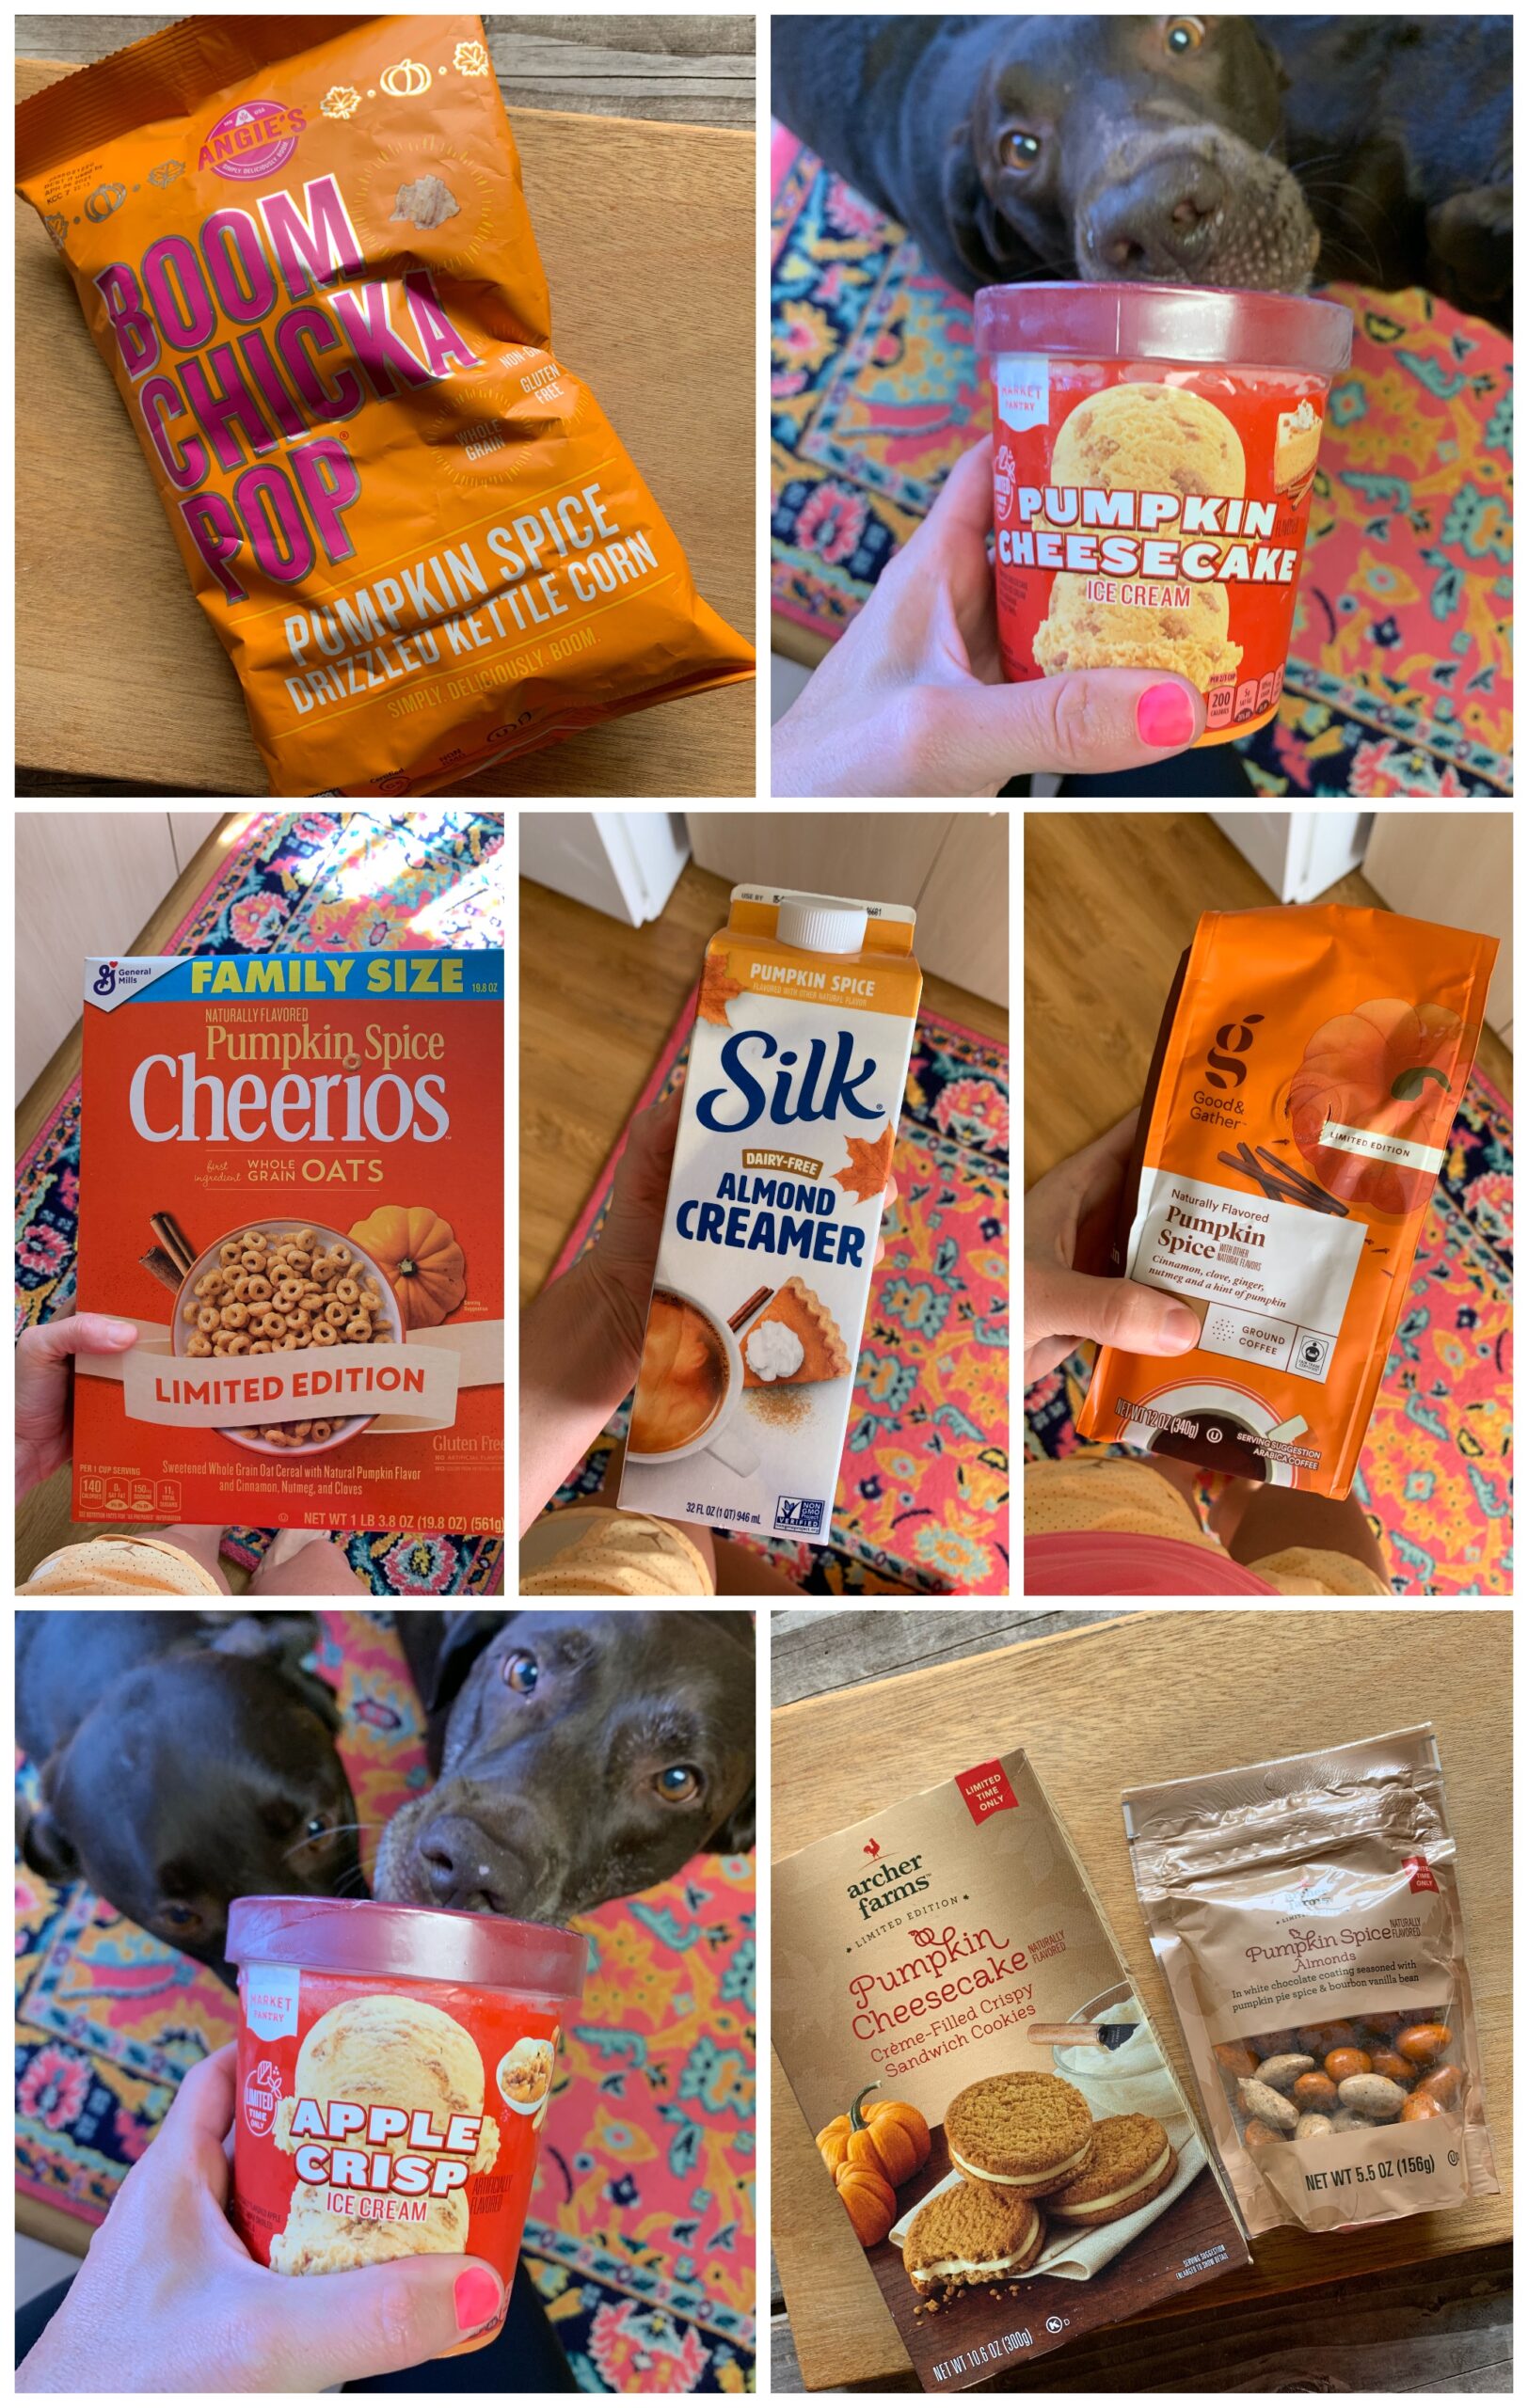 Fall Food From Target - What To Try + What To Skip - A full review of the seasonal fall food from Target, including what I loved + what to skip! | Target Food - Pumpkin Spice at Target - Target Fall Food